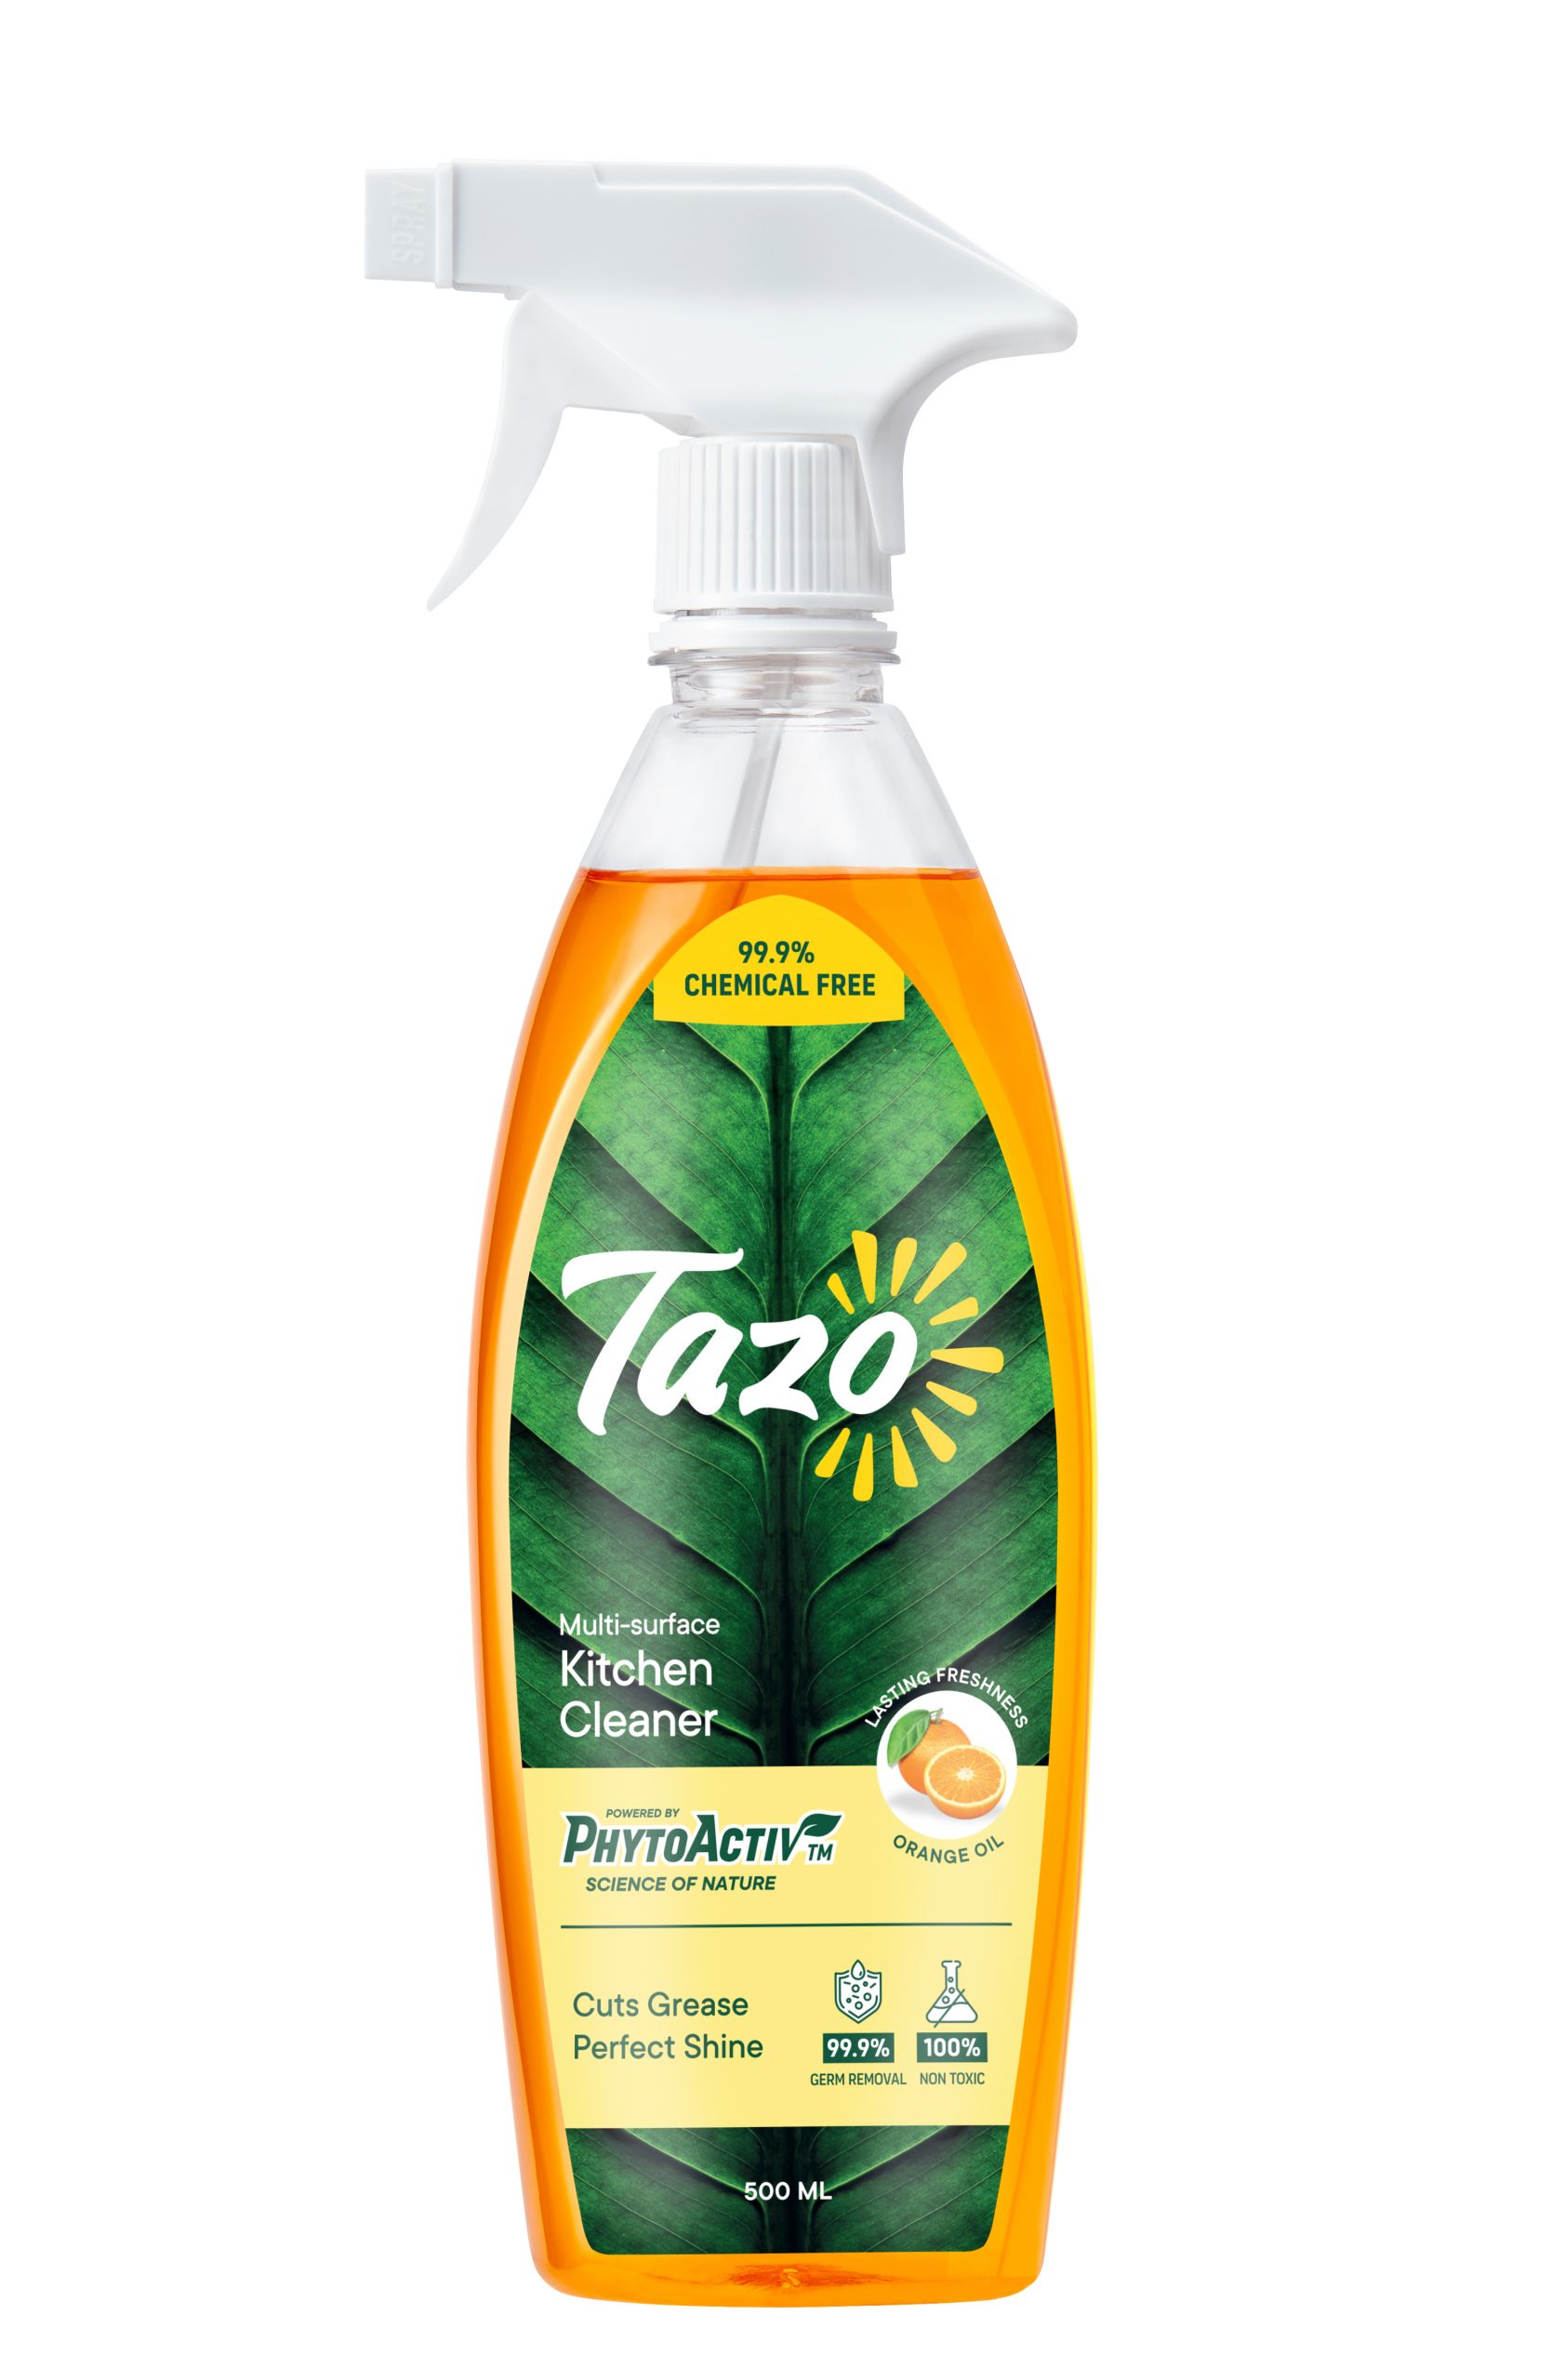 TAZO Kitchen Cleaner scaled 1